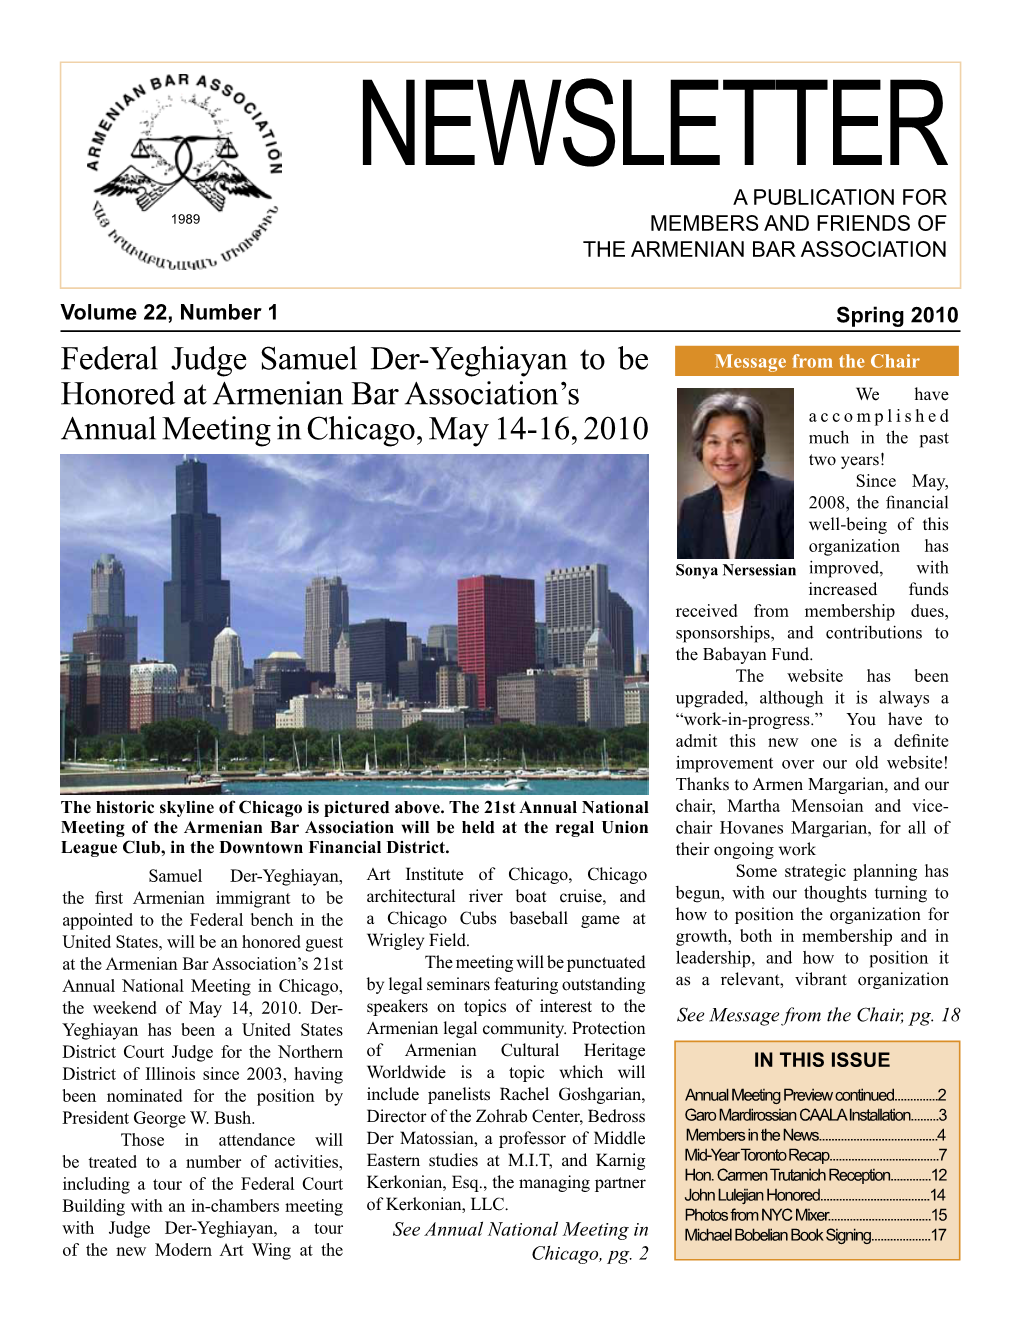 Federal Judge Samuel Der-Yeghiayan to Be Honored At